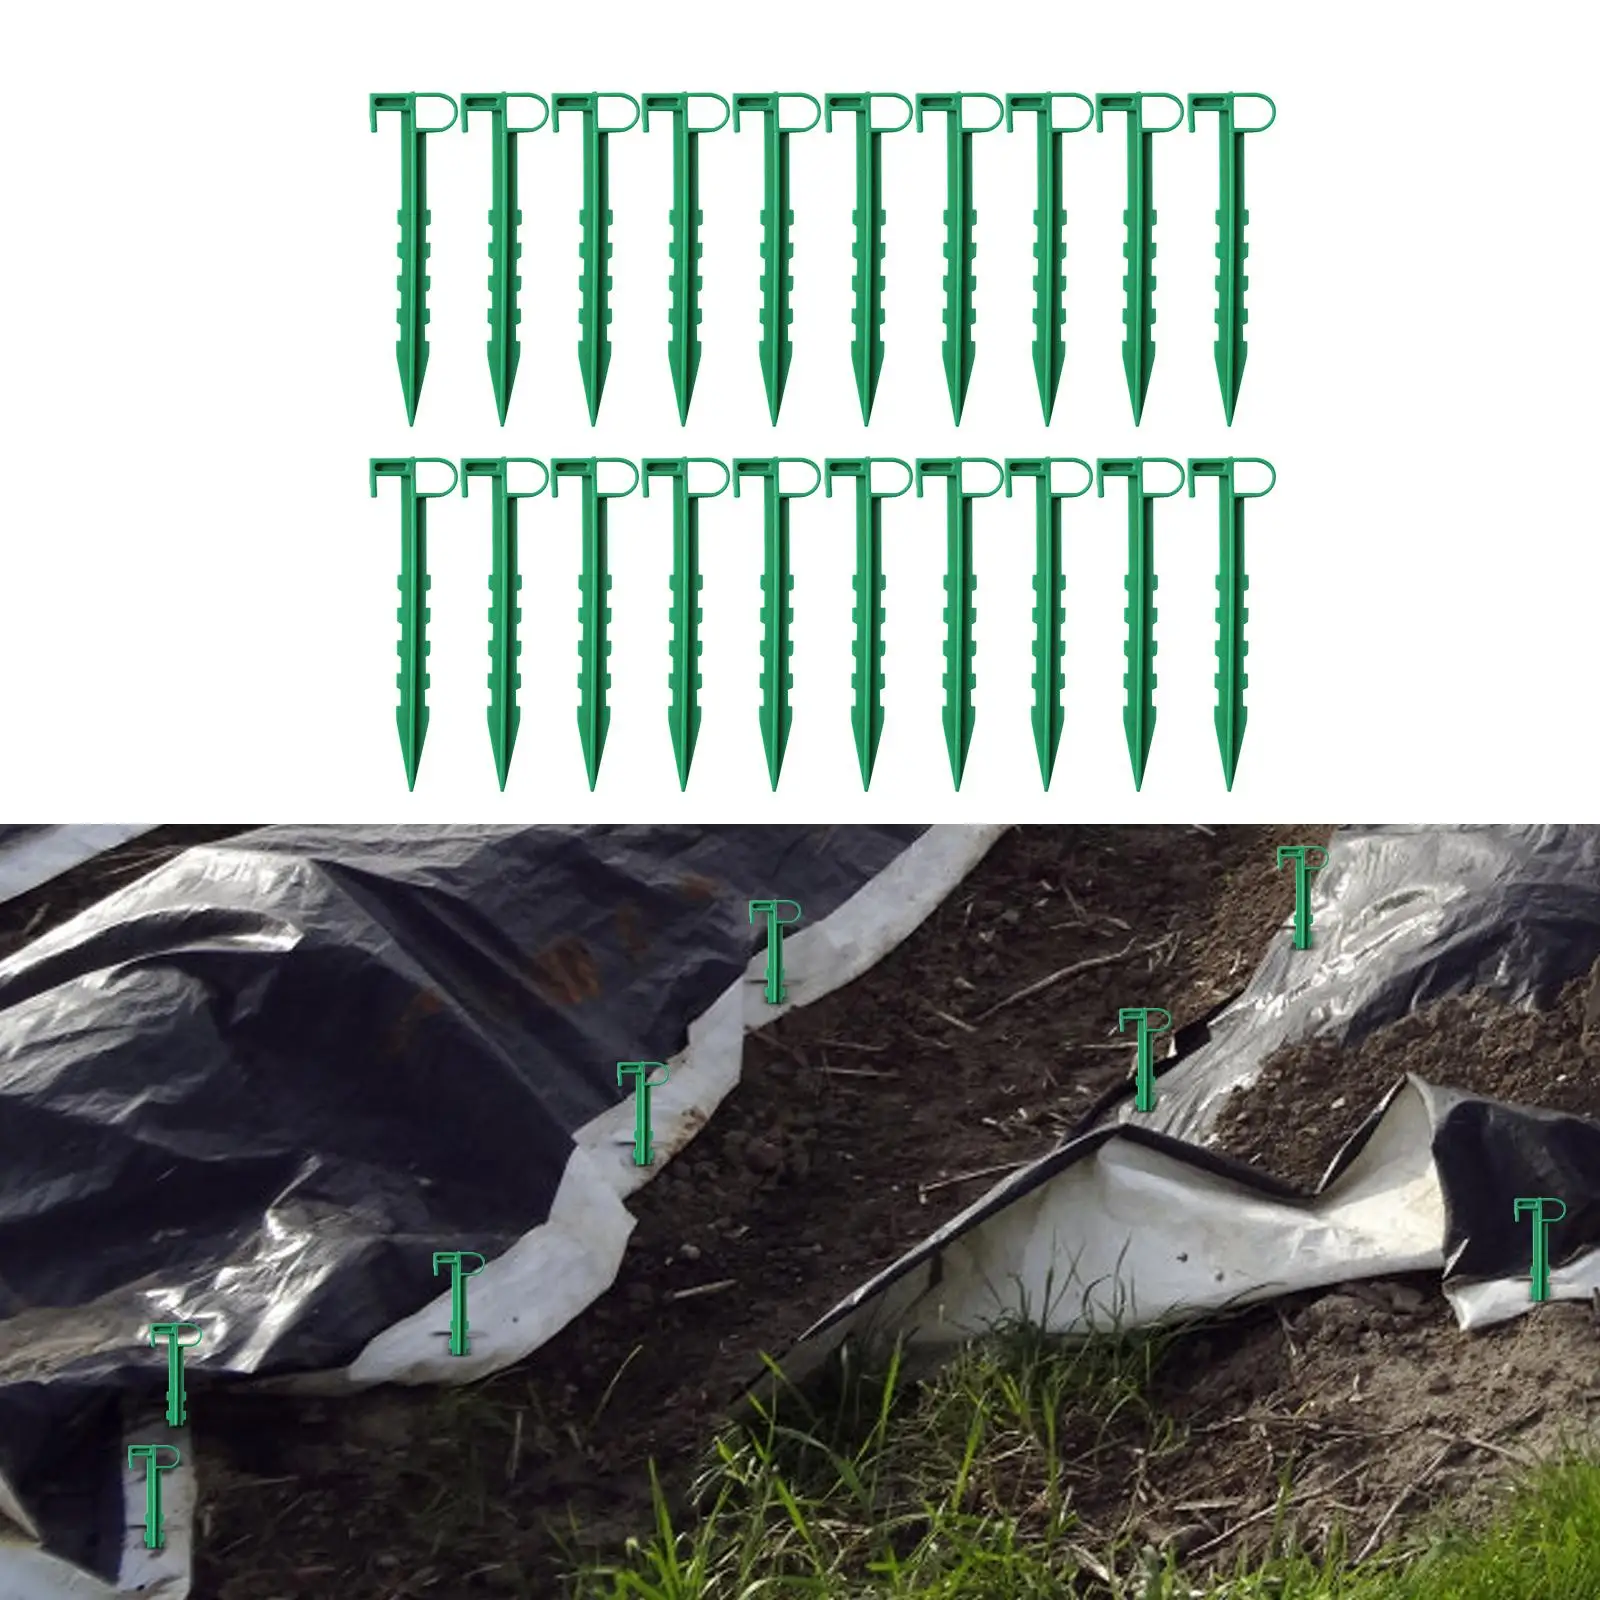 20Pcs Garden Stakes Yard Mat Cloth Nails Durable Ground Auger Fixation Anchor Pegs for Camping Holding Down Tents Greenhouse